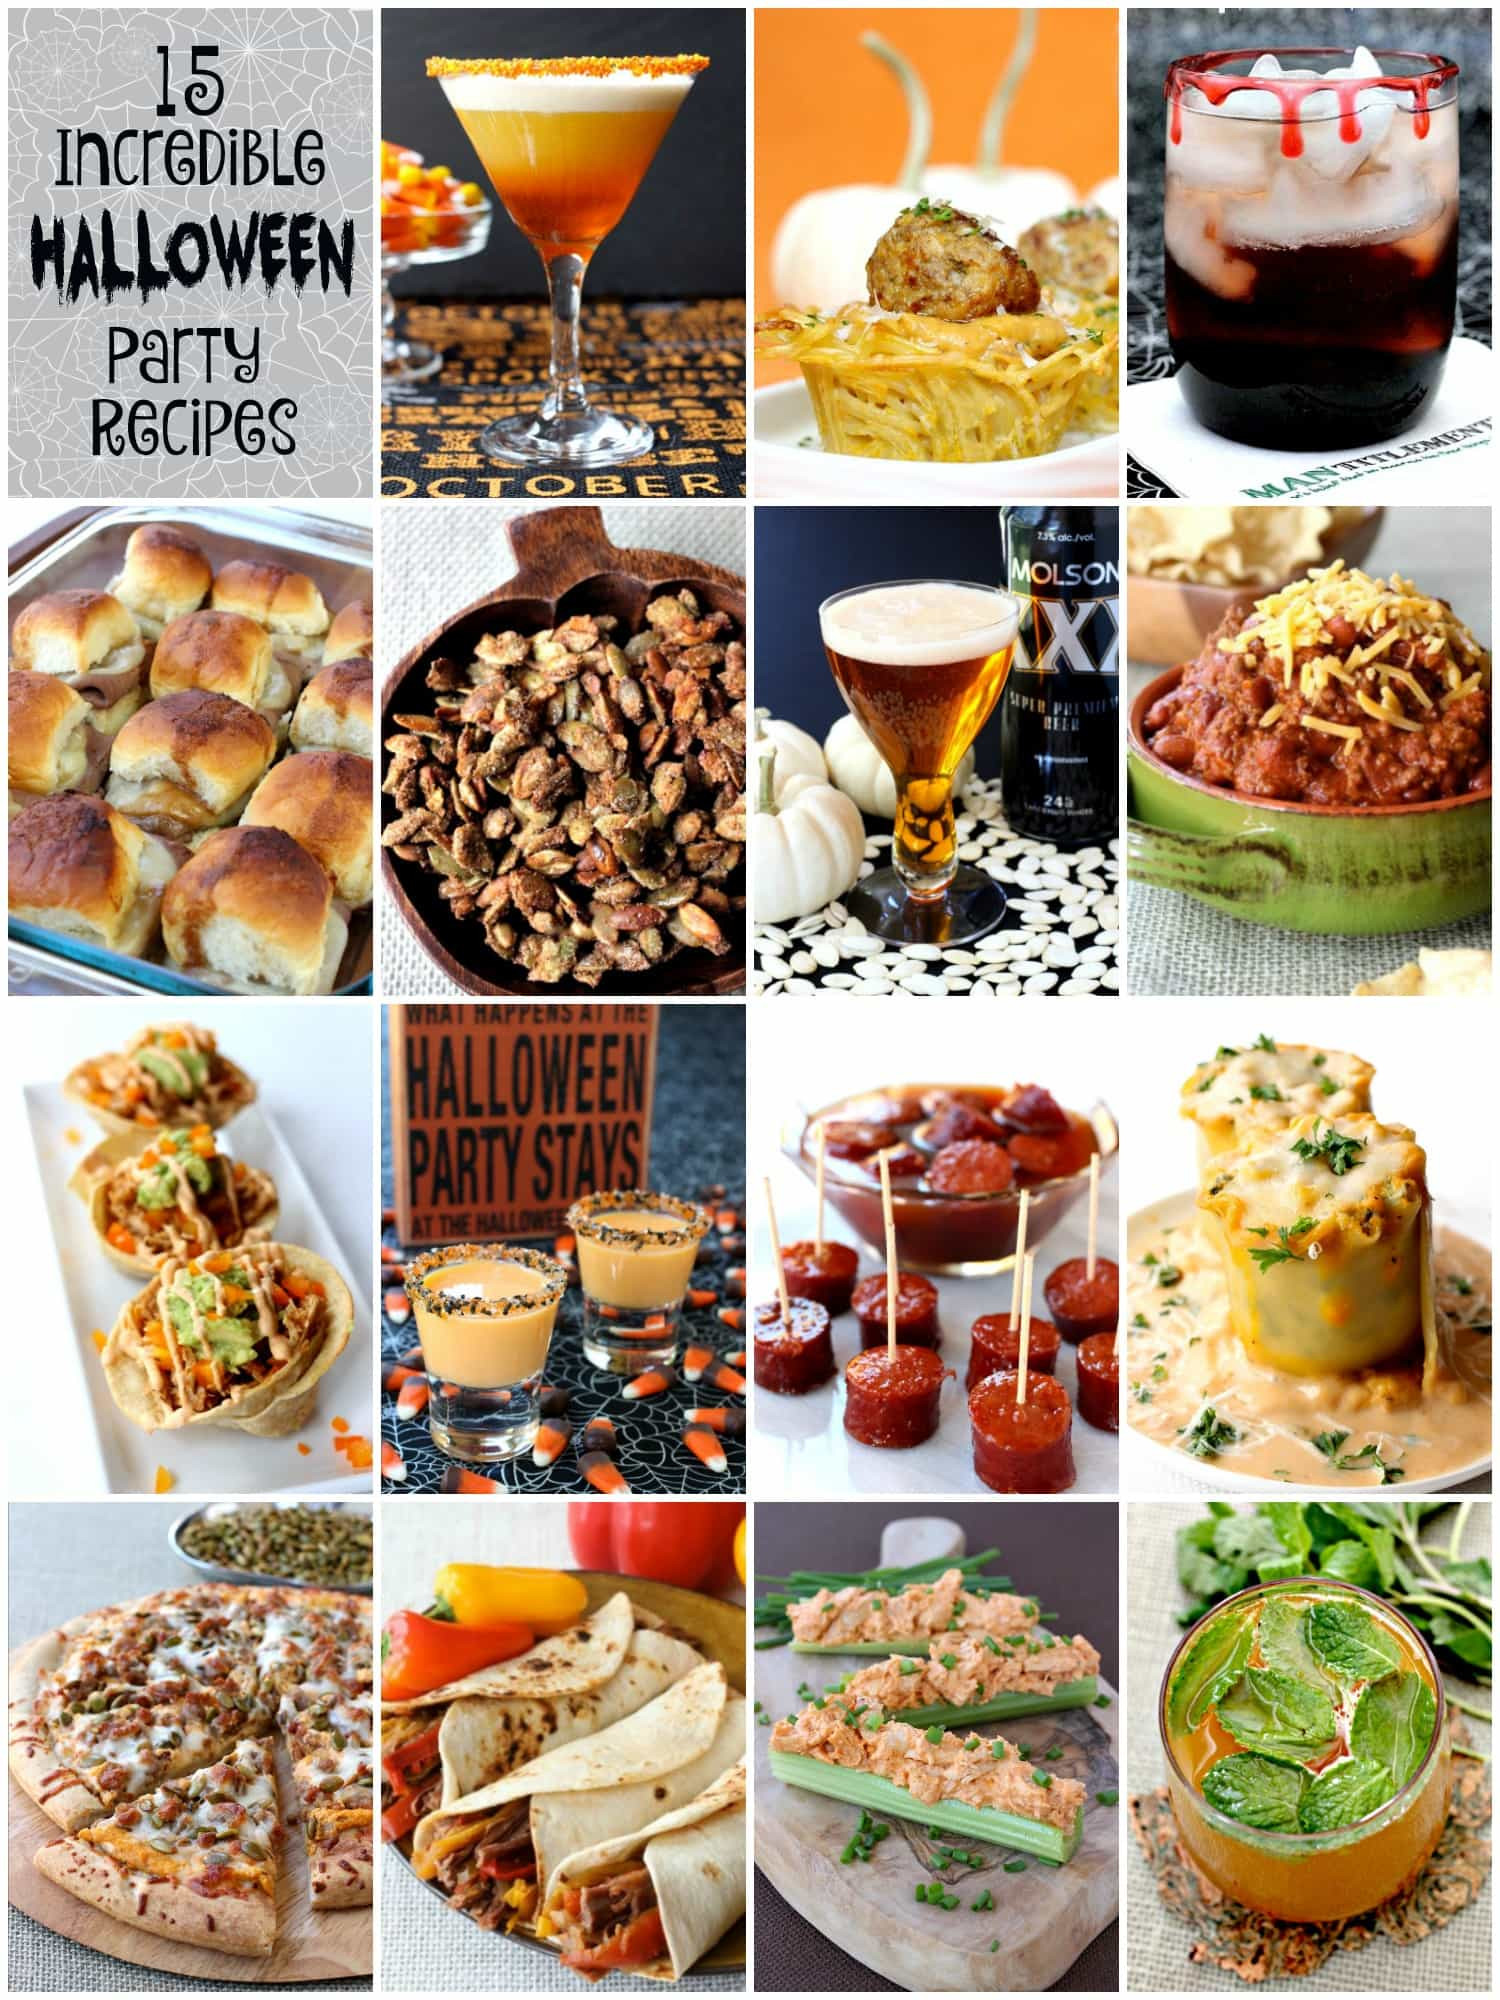 Halloween Party Menu Ideas For Adults
 15 Incredible Halloween Party Recipes